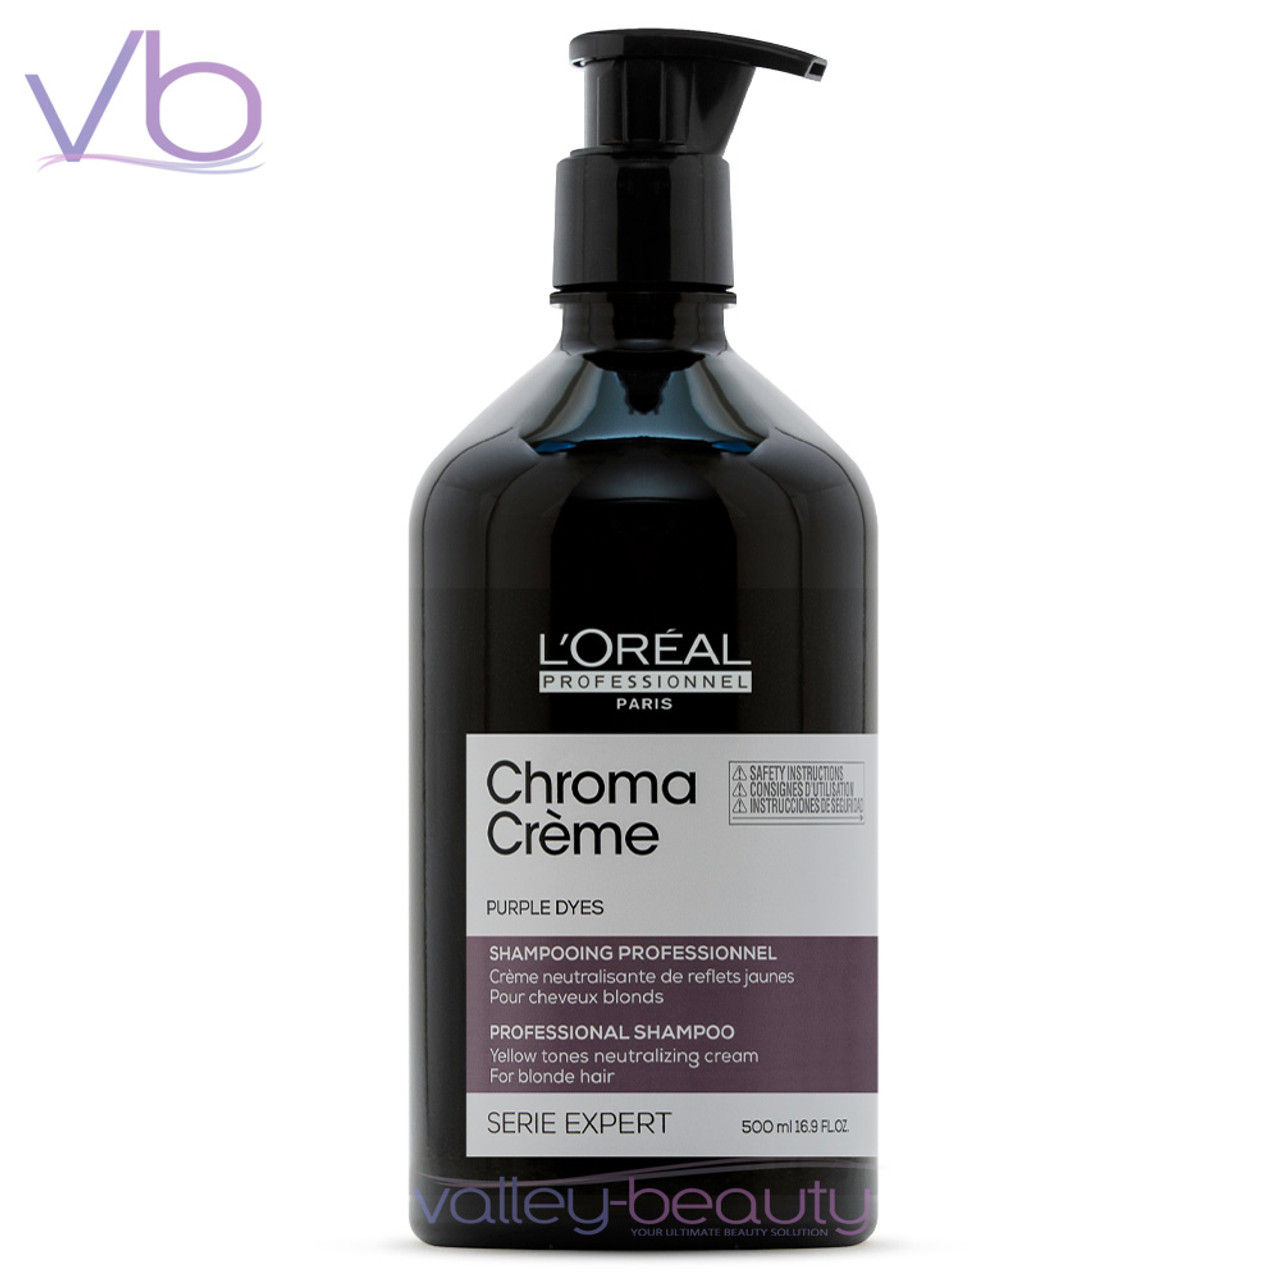 L'Oreal L’Oreal Professionnel Chroma Creme Purple Dyes Shampoo | Yellow Tones Neutralizing Cleanser for Blond, Platinum, Grey Hair 500ml